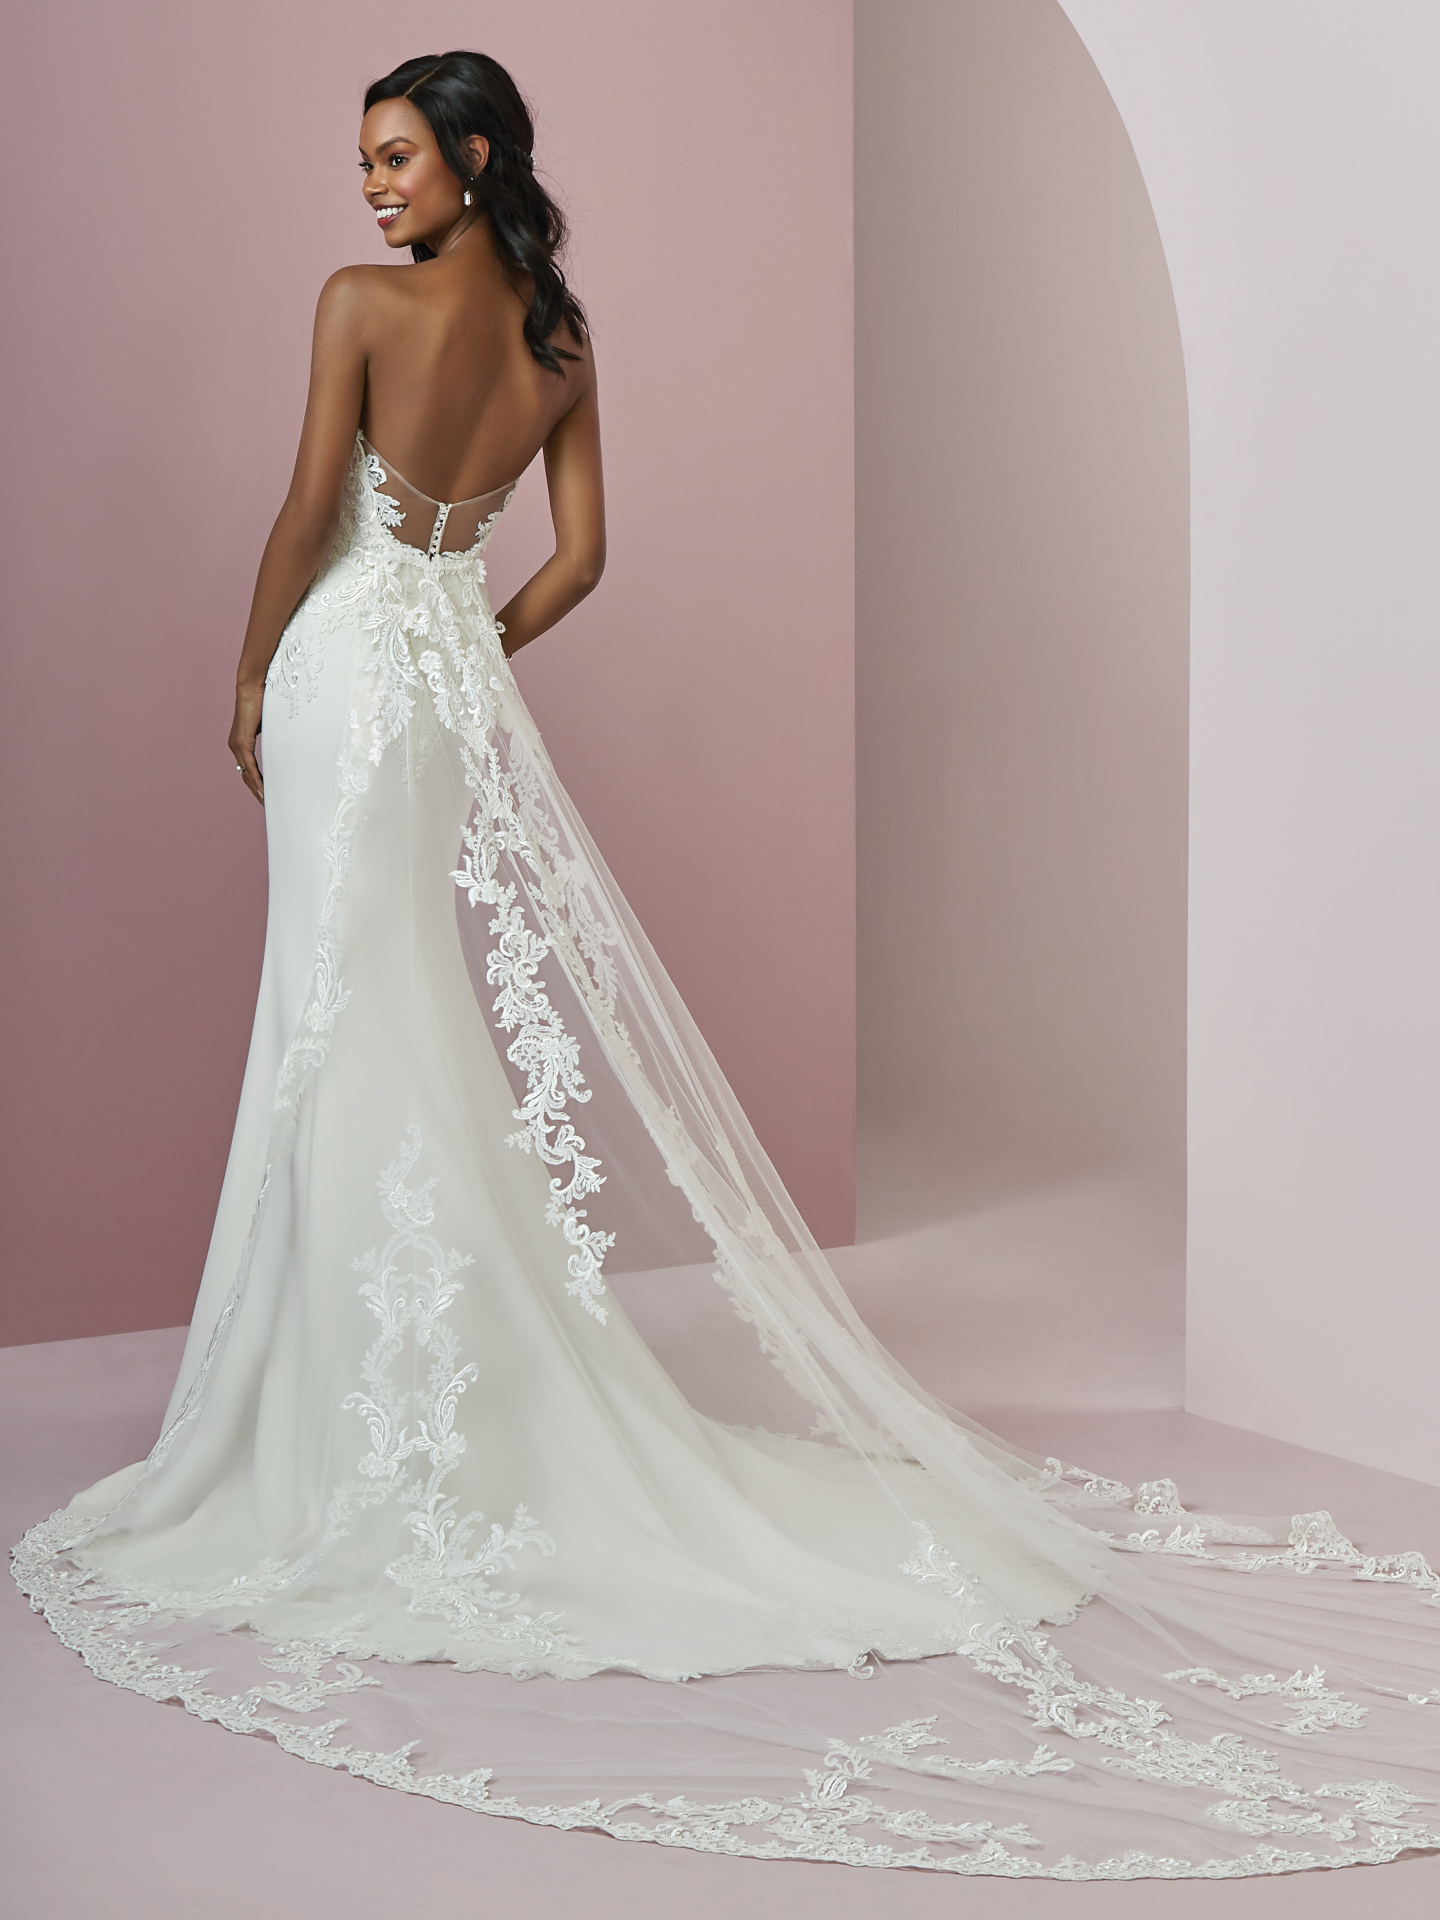 10 relaxed wedding dresses from our Camille collection by Rebecca Ingram - Choose Billie for a formal and crepe gown.